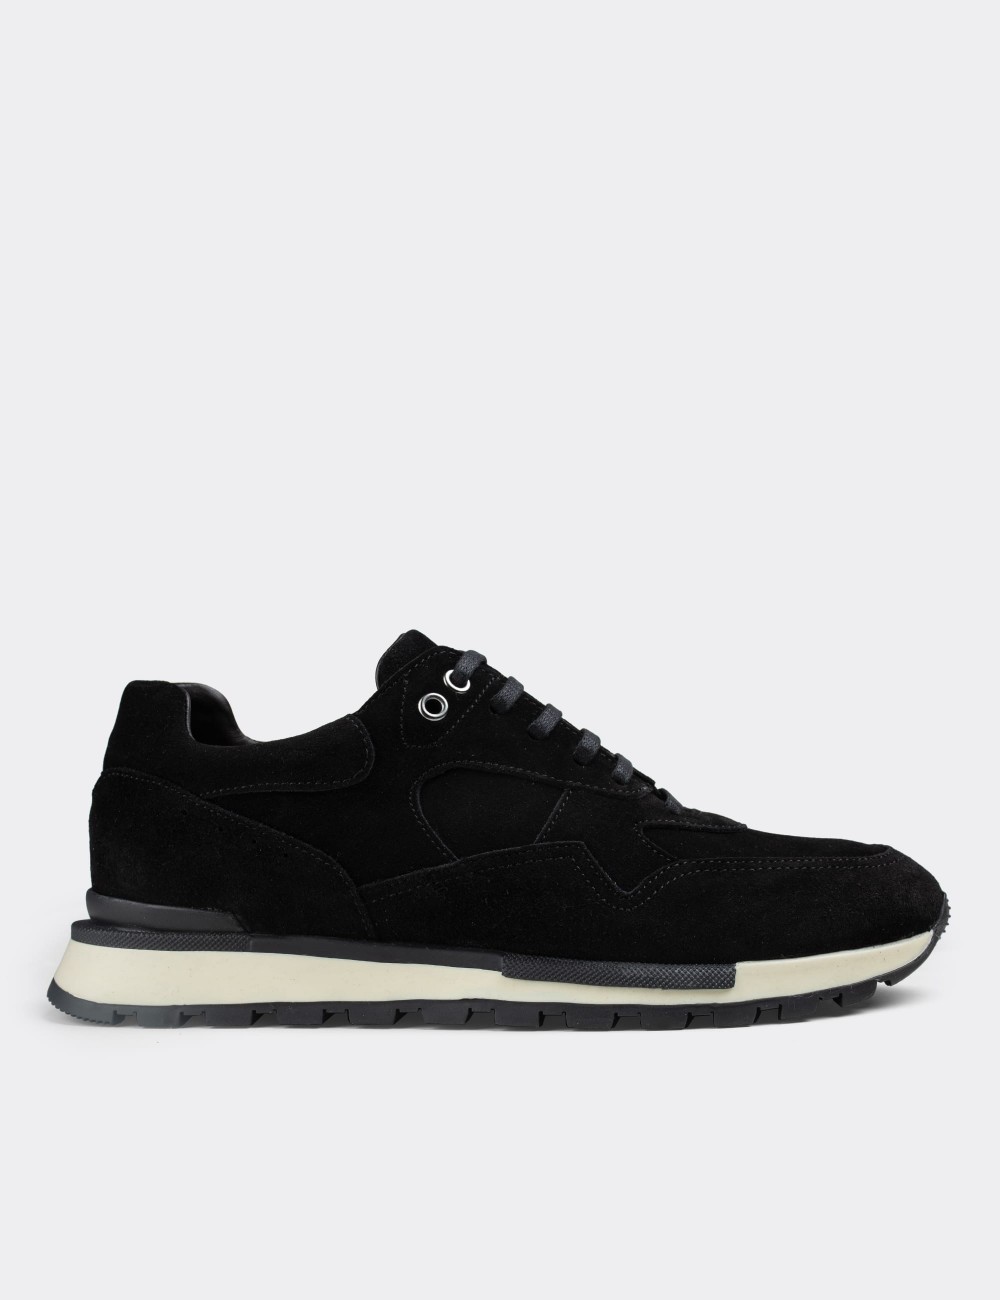 Black Suede Leather Sneakers - 01818MSYHT01